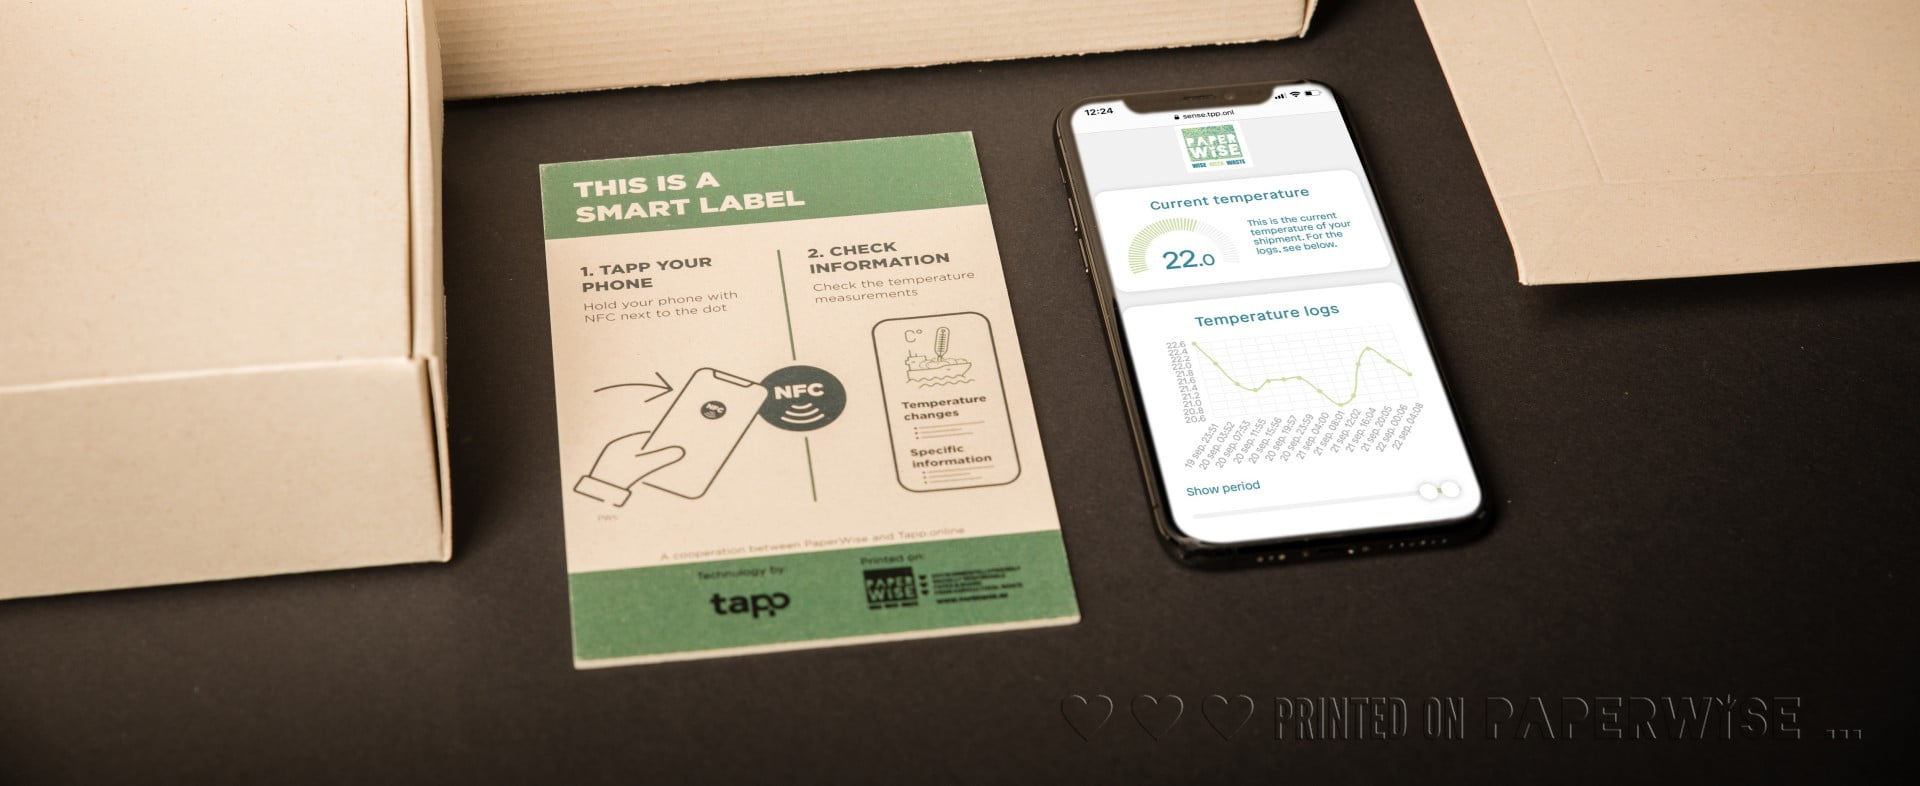 Tapp.online and PaperWise: Sensors in Sustainable Paper and Packaging Help Save Costs